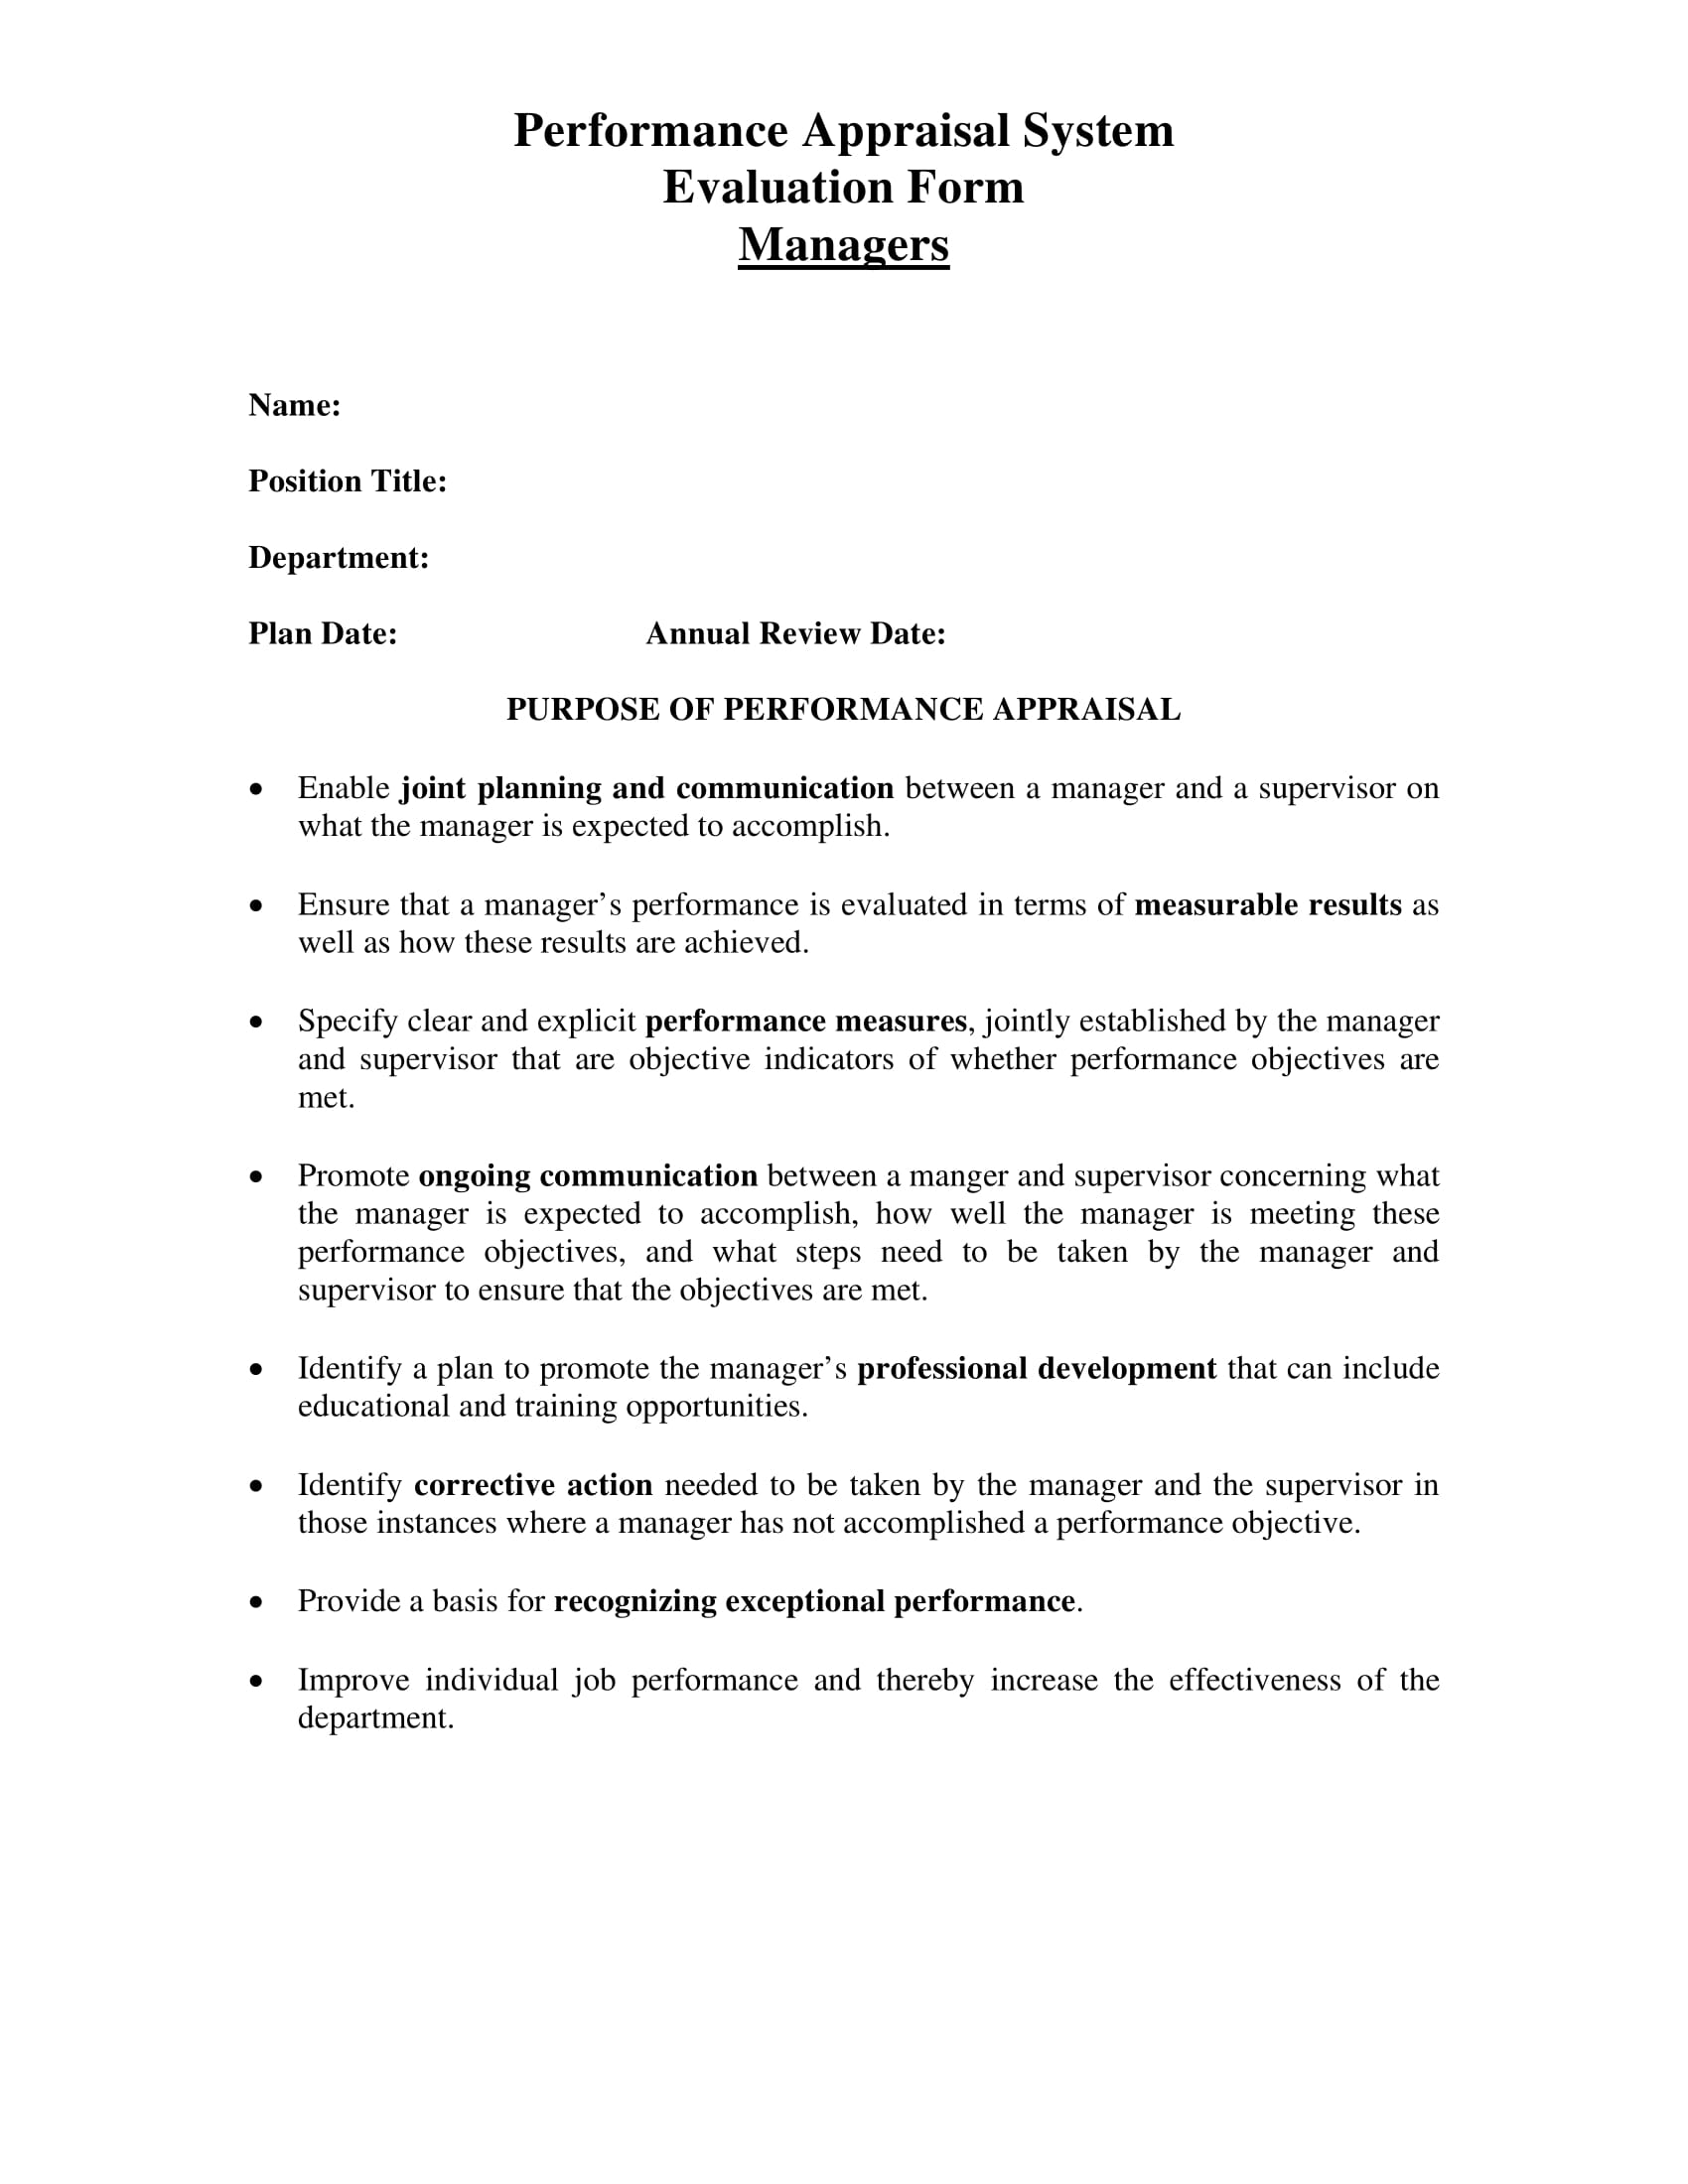 manager performance appraisal evaluation form 1